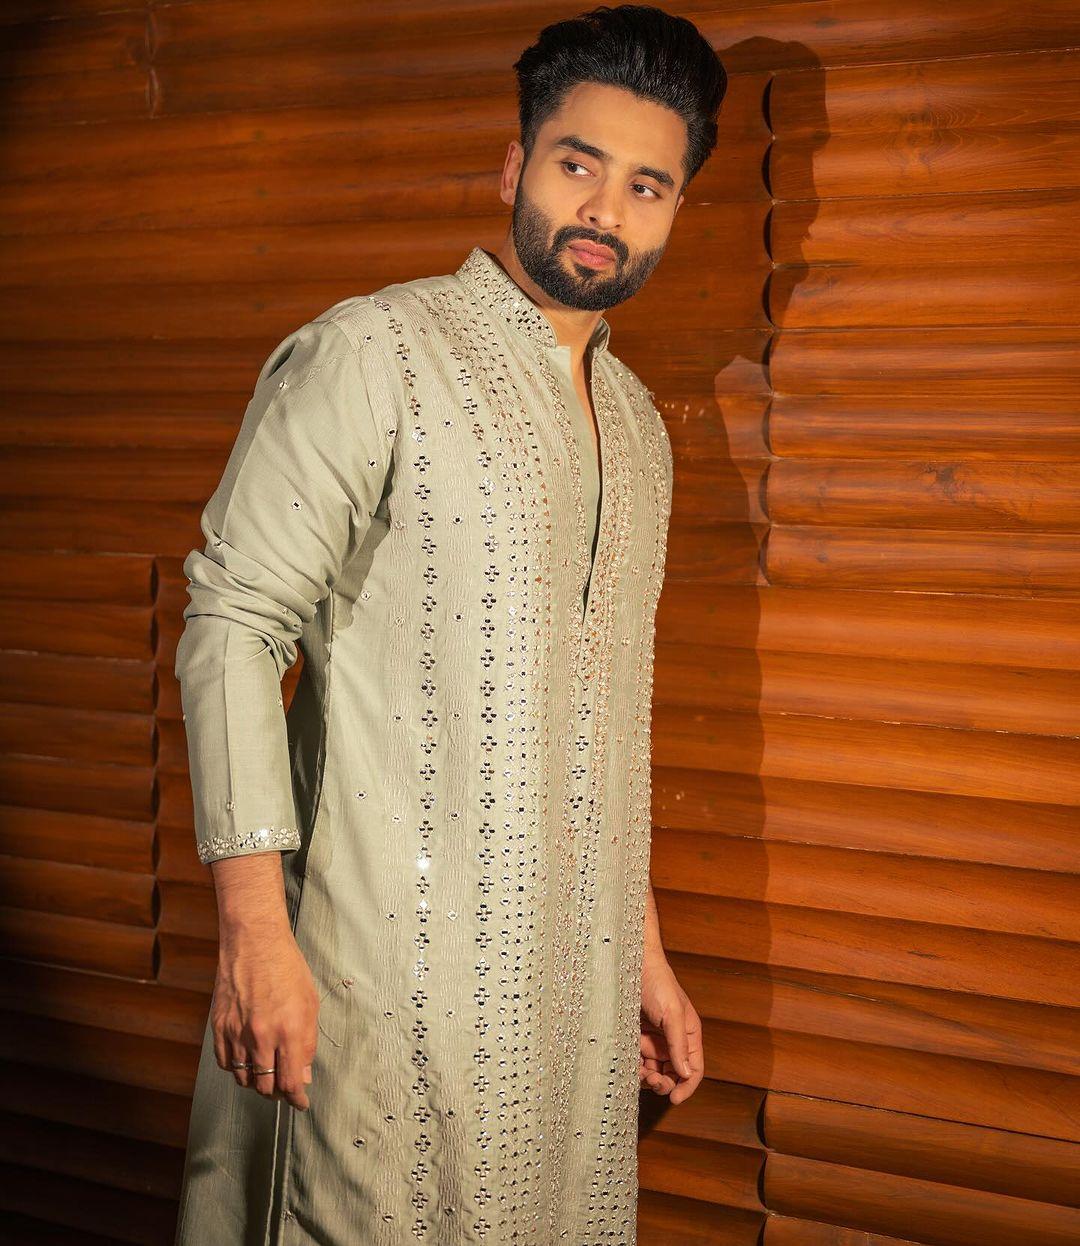 Opting for a pastel-coloured kurta adorned with intricate mirror work, Jackky strikes the perfect balance between muted tones and sparkling embellishments